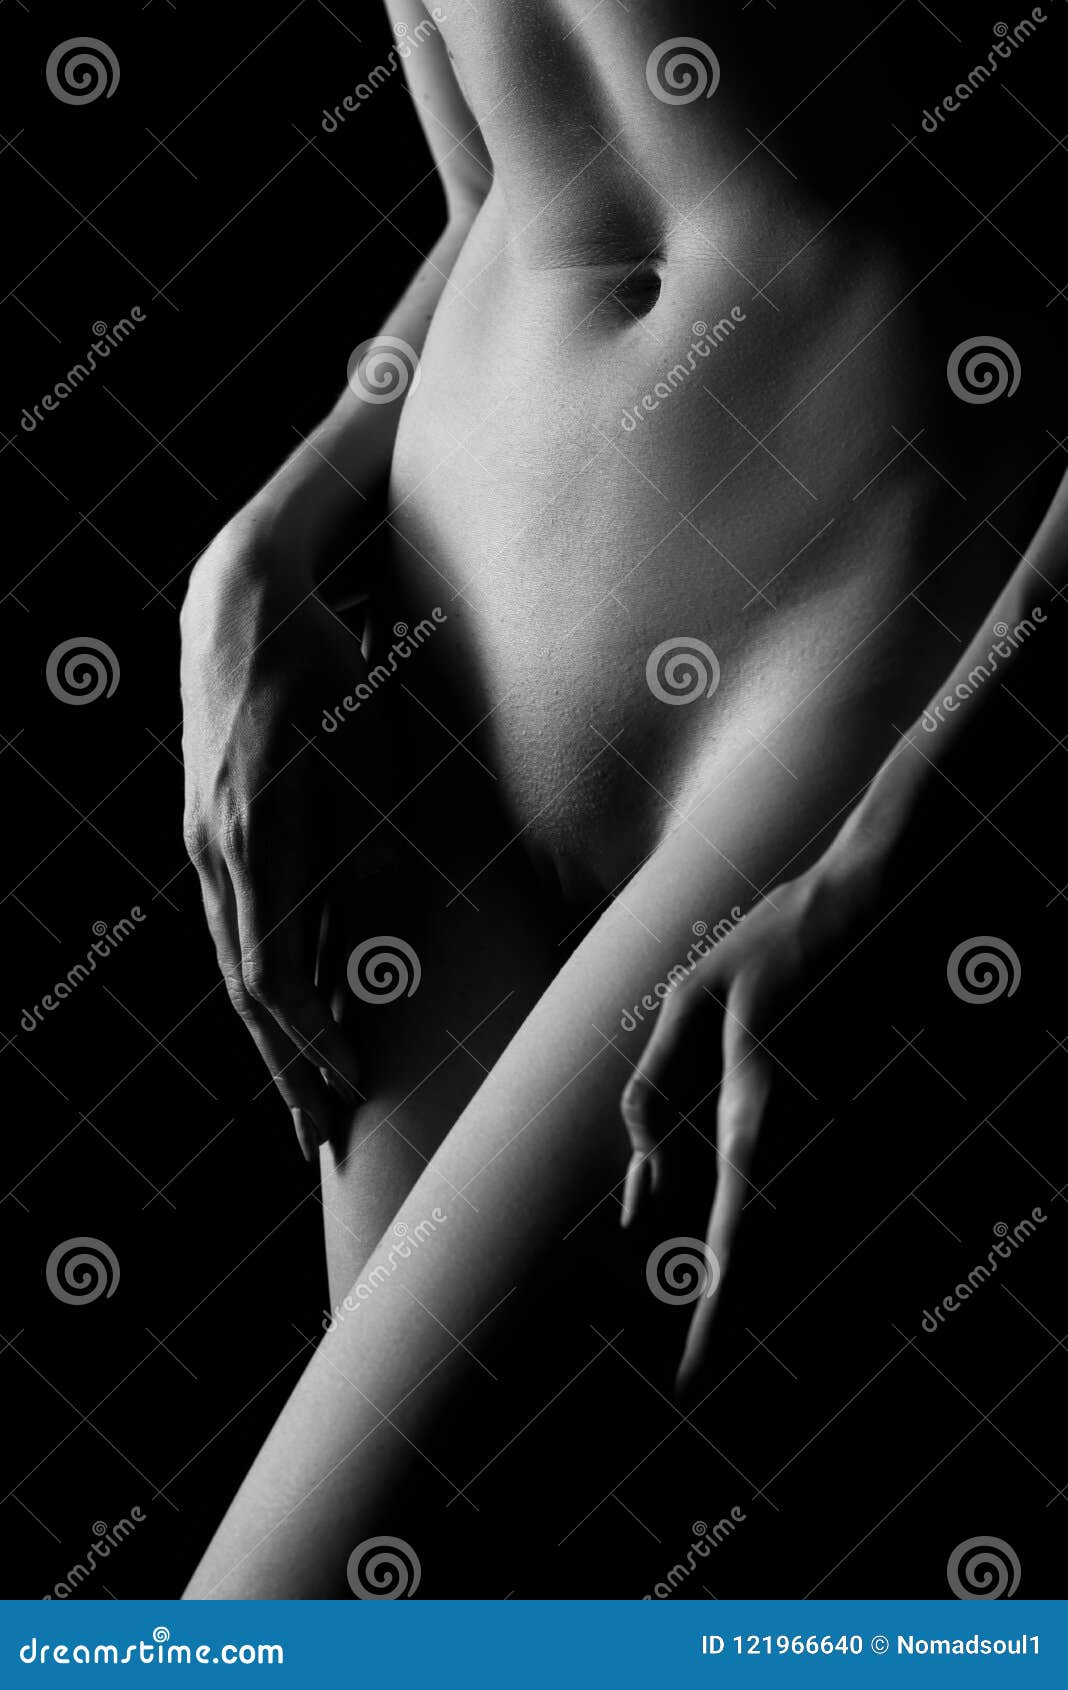 Black guy holding flower infront of naked woman art Naked Body Of Female Person Nu Art Front View Stock Photo Image Of Female Body 121966640